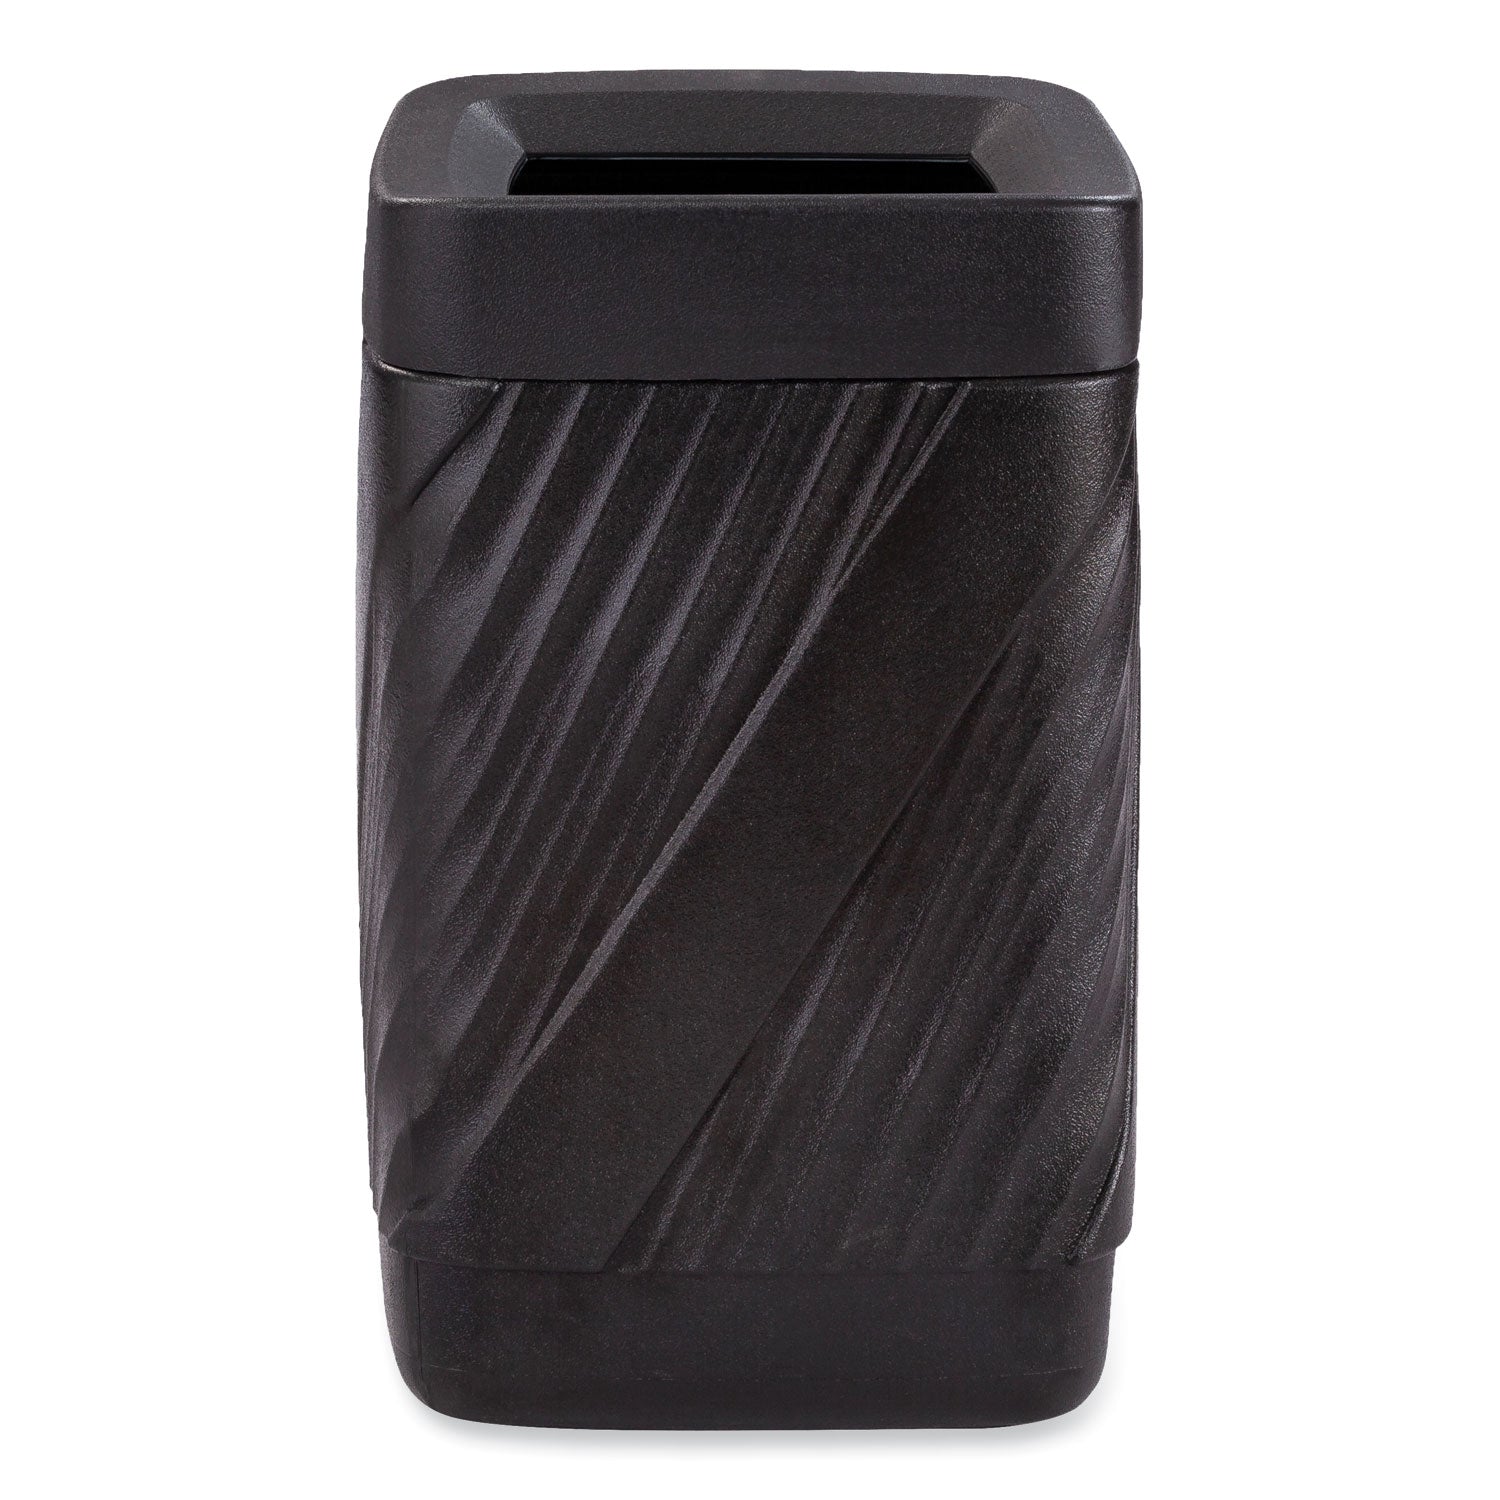 Safco Twist Waste Receptacle - 32 gal Capacity - Removable Lid, Durable, UV Resistant, Fade Resistant - 30" Height x 18.9" Width x 18.9" Depth - High-density Polyethylene (HDPE) - Black - 1 Each - 2